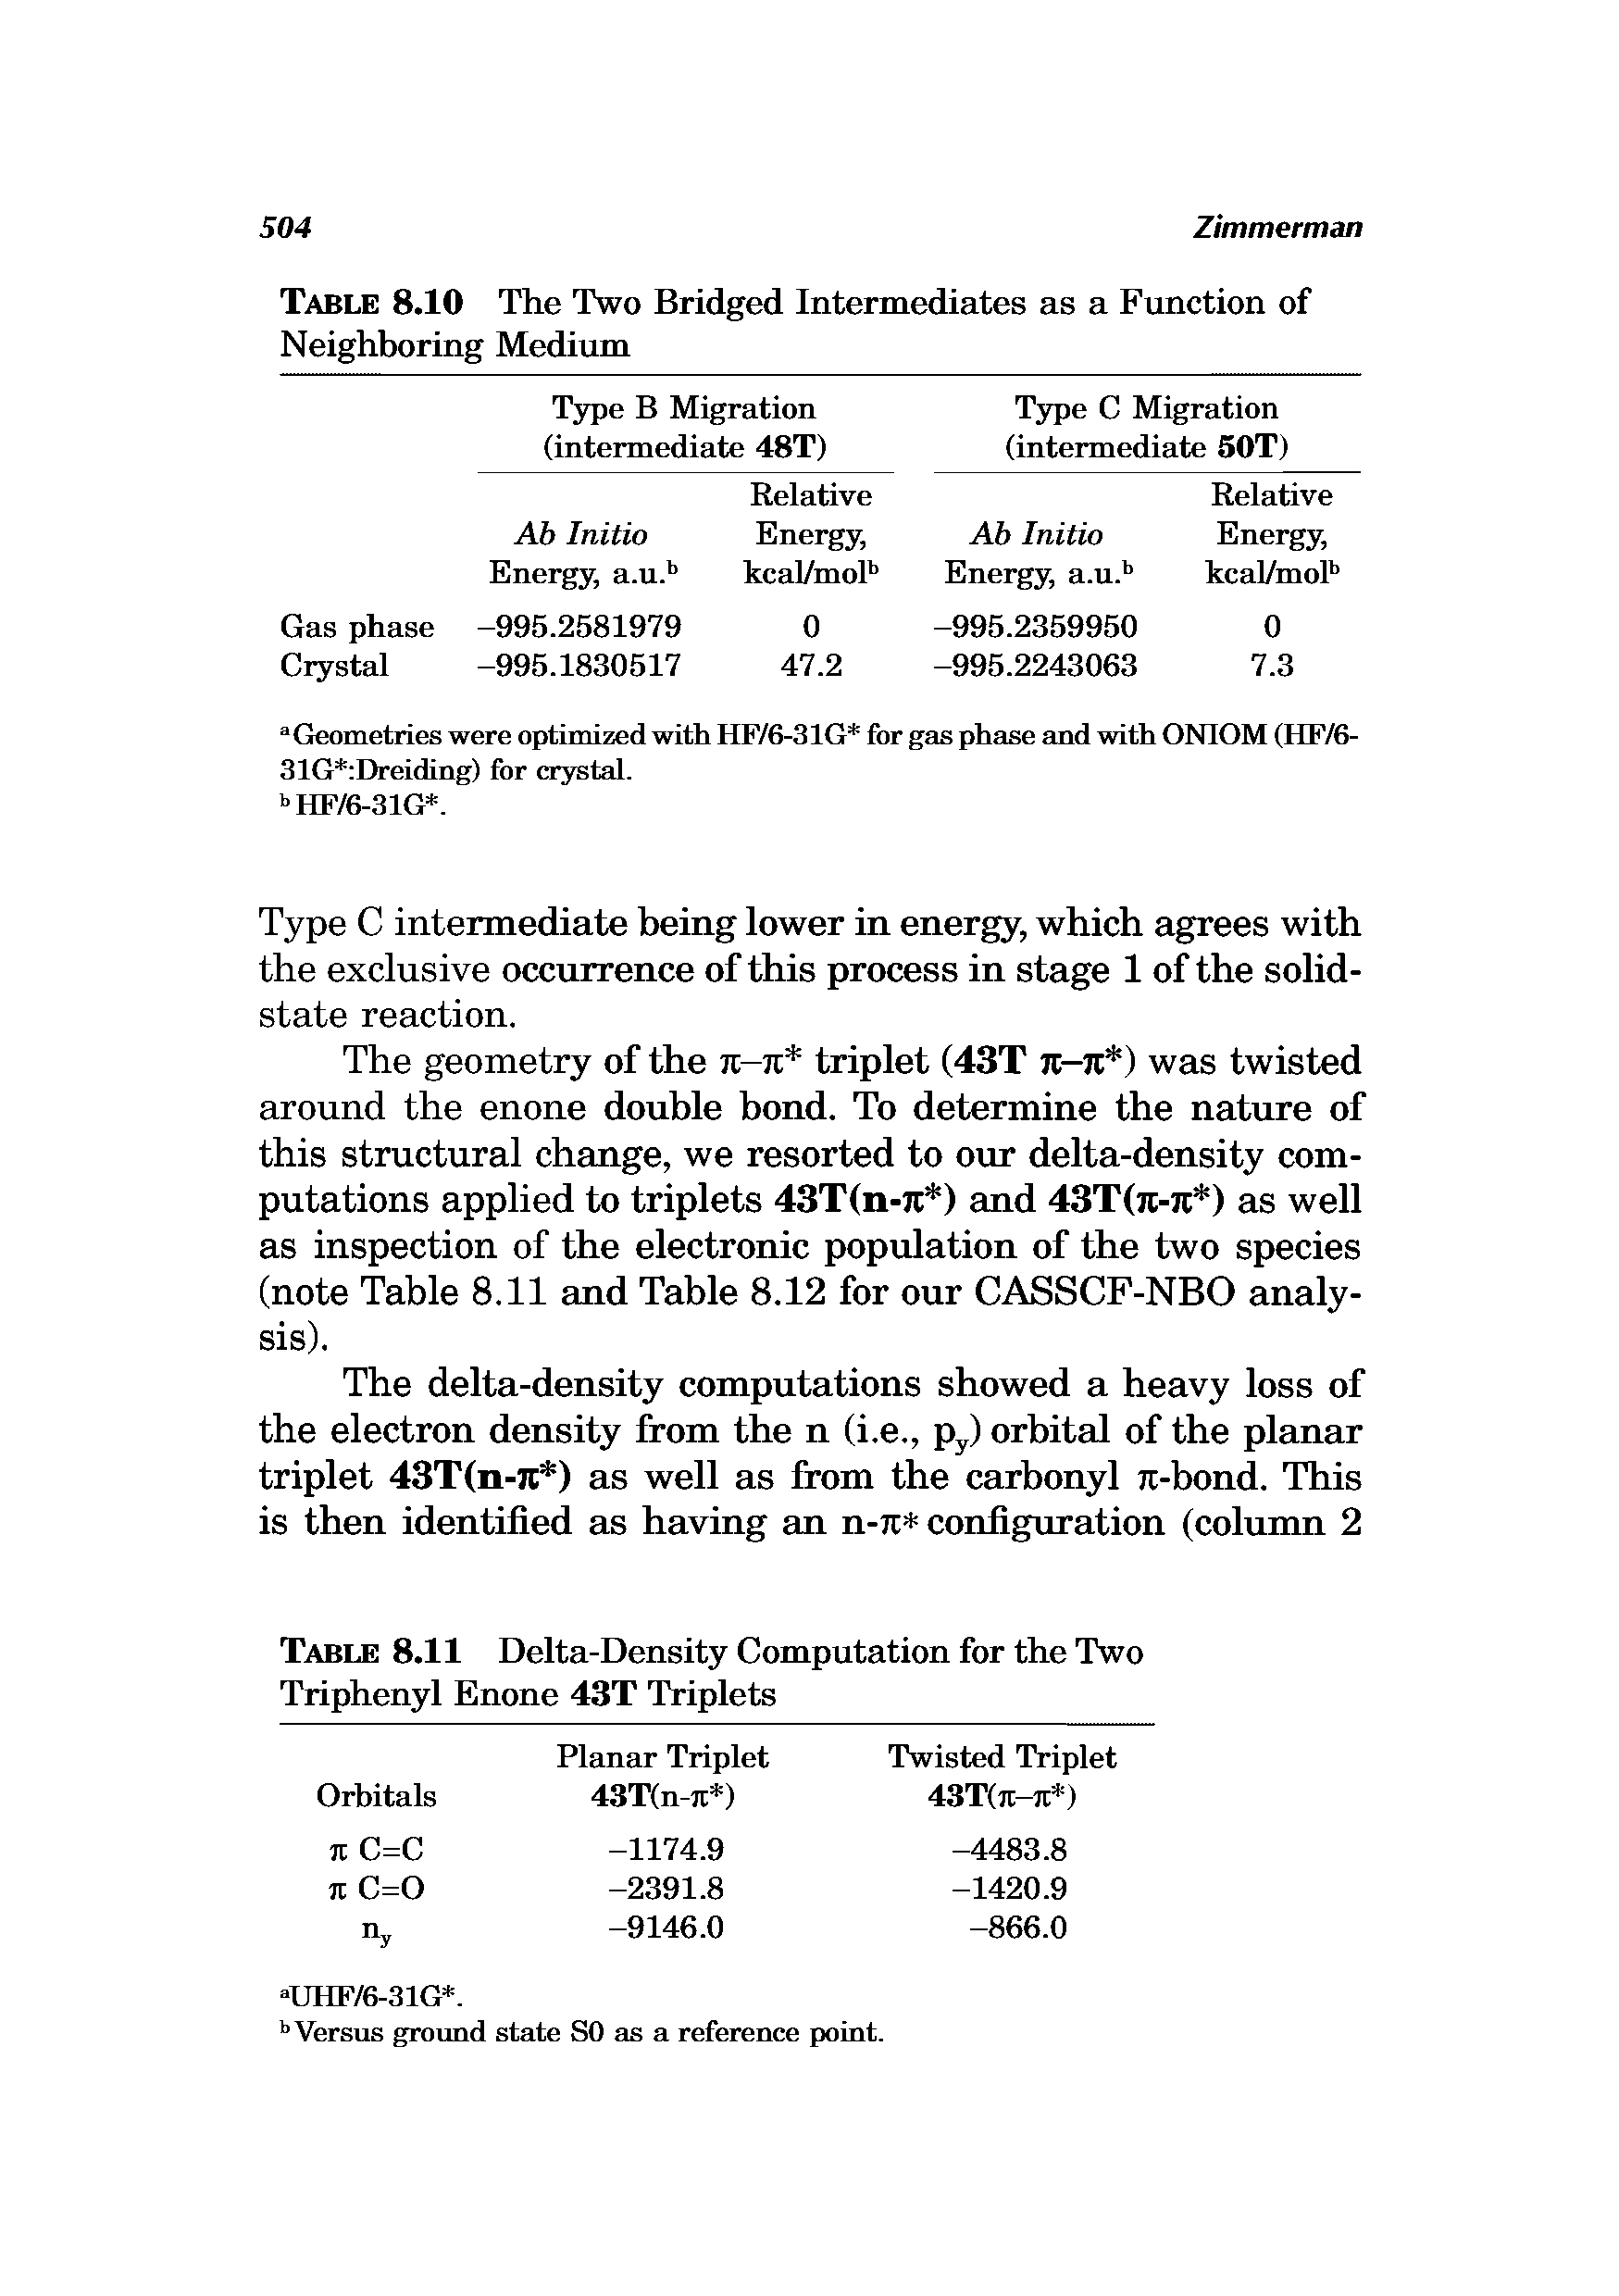 Table 8.11 Delta-Density Computation for the Two Triphenyl Enone 43T Triplets...